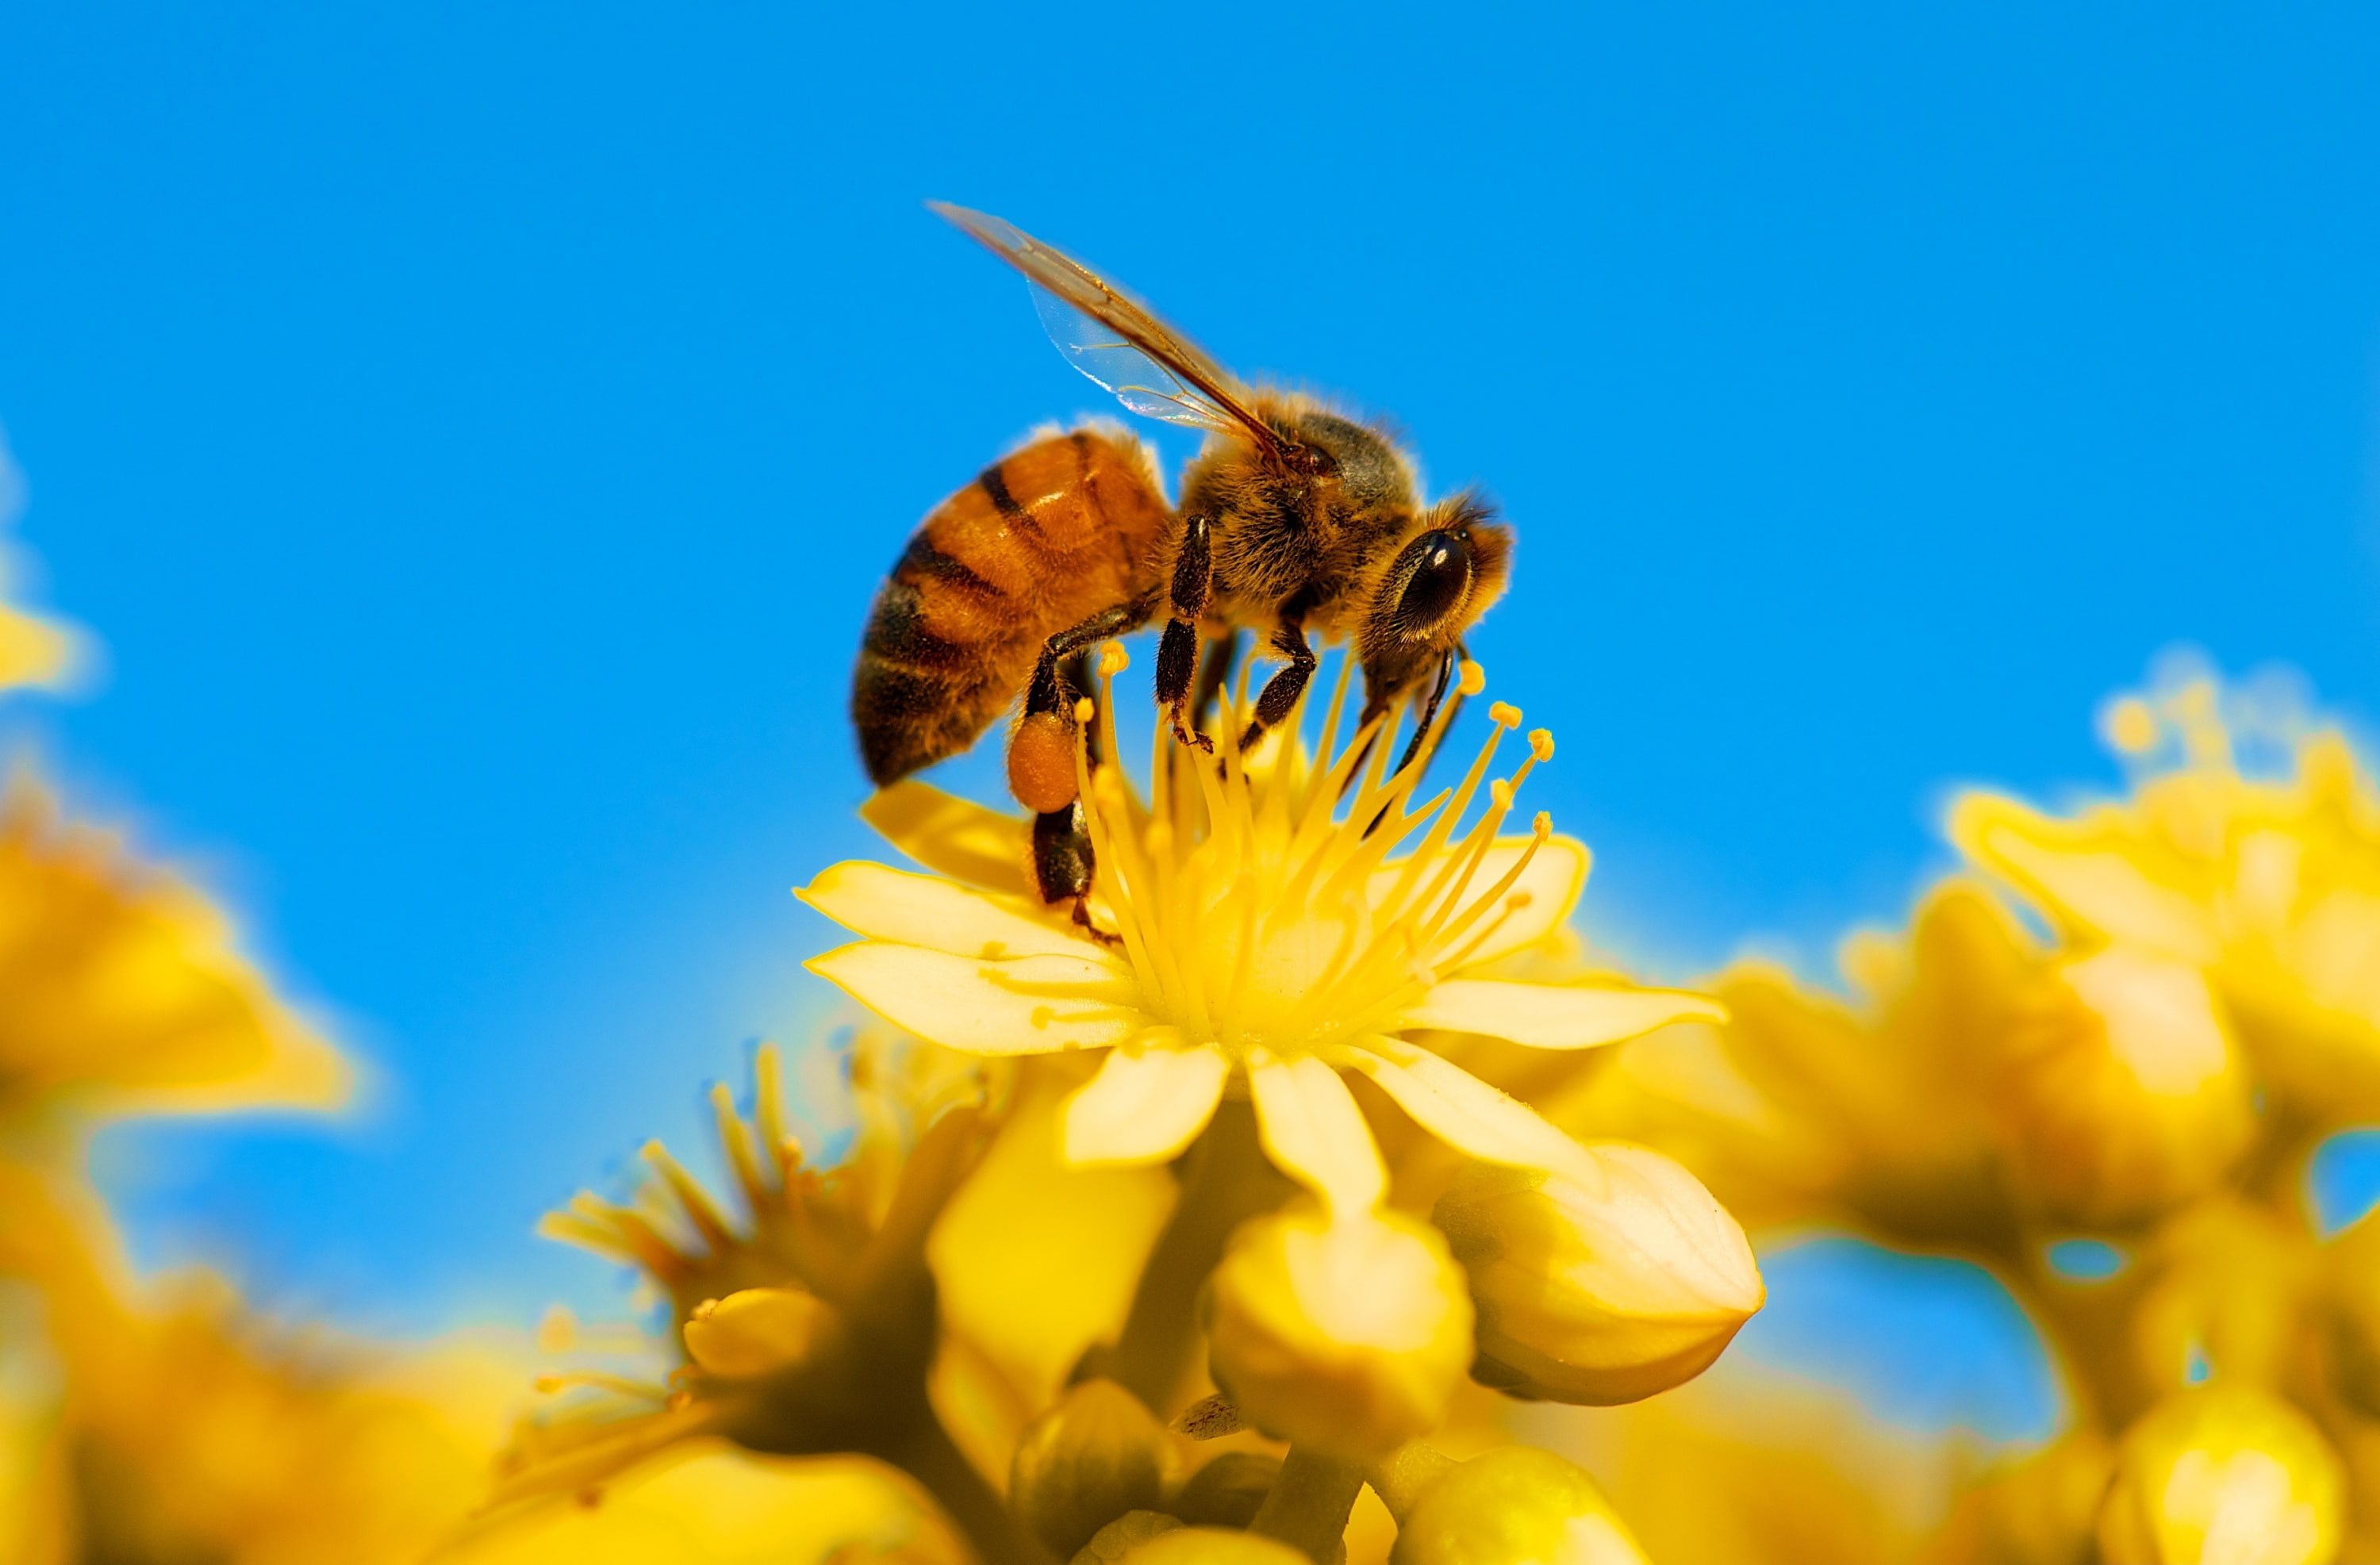 Honey Bee, Yellow Flower, Blue Sky, Animals, Insects, Nature